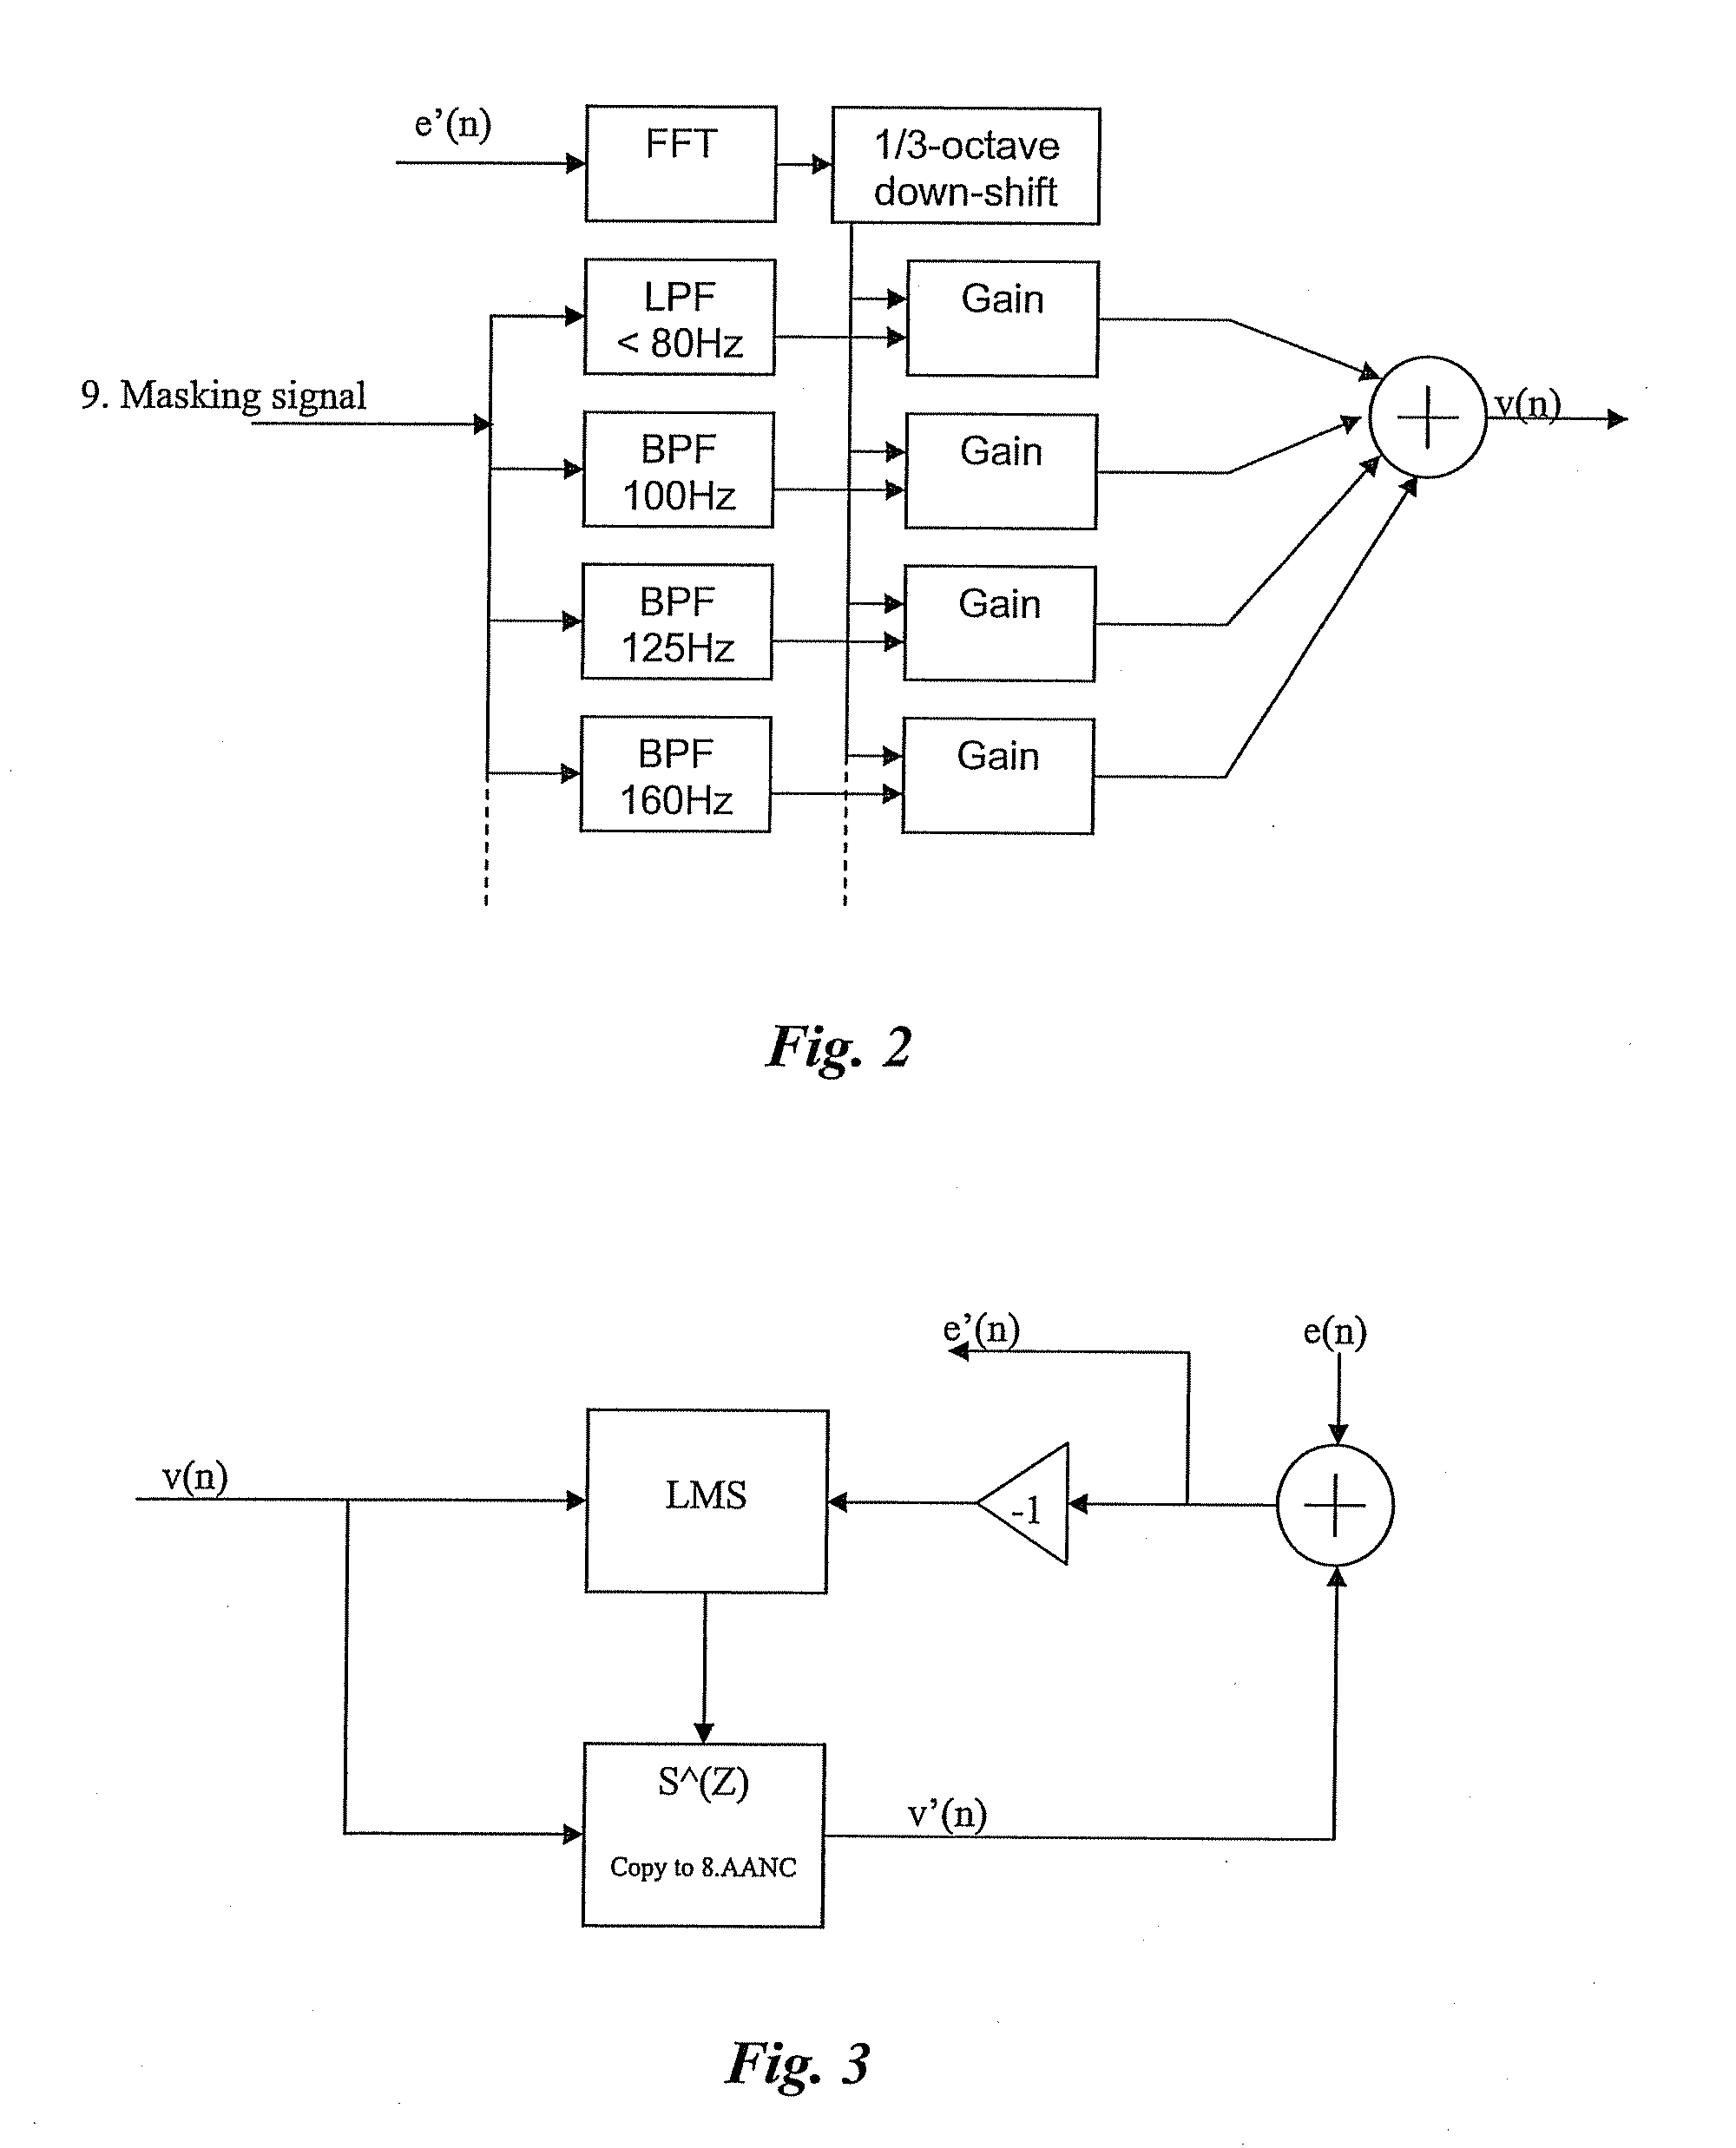 System for providing a reduction of audiable noise perception for a human user